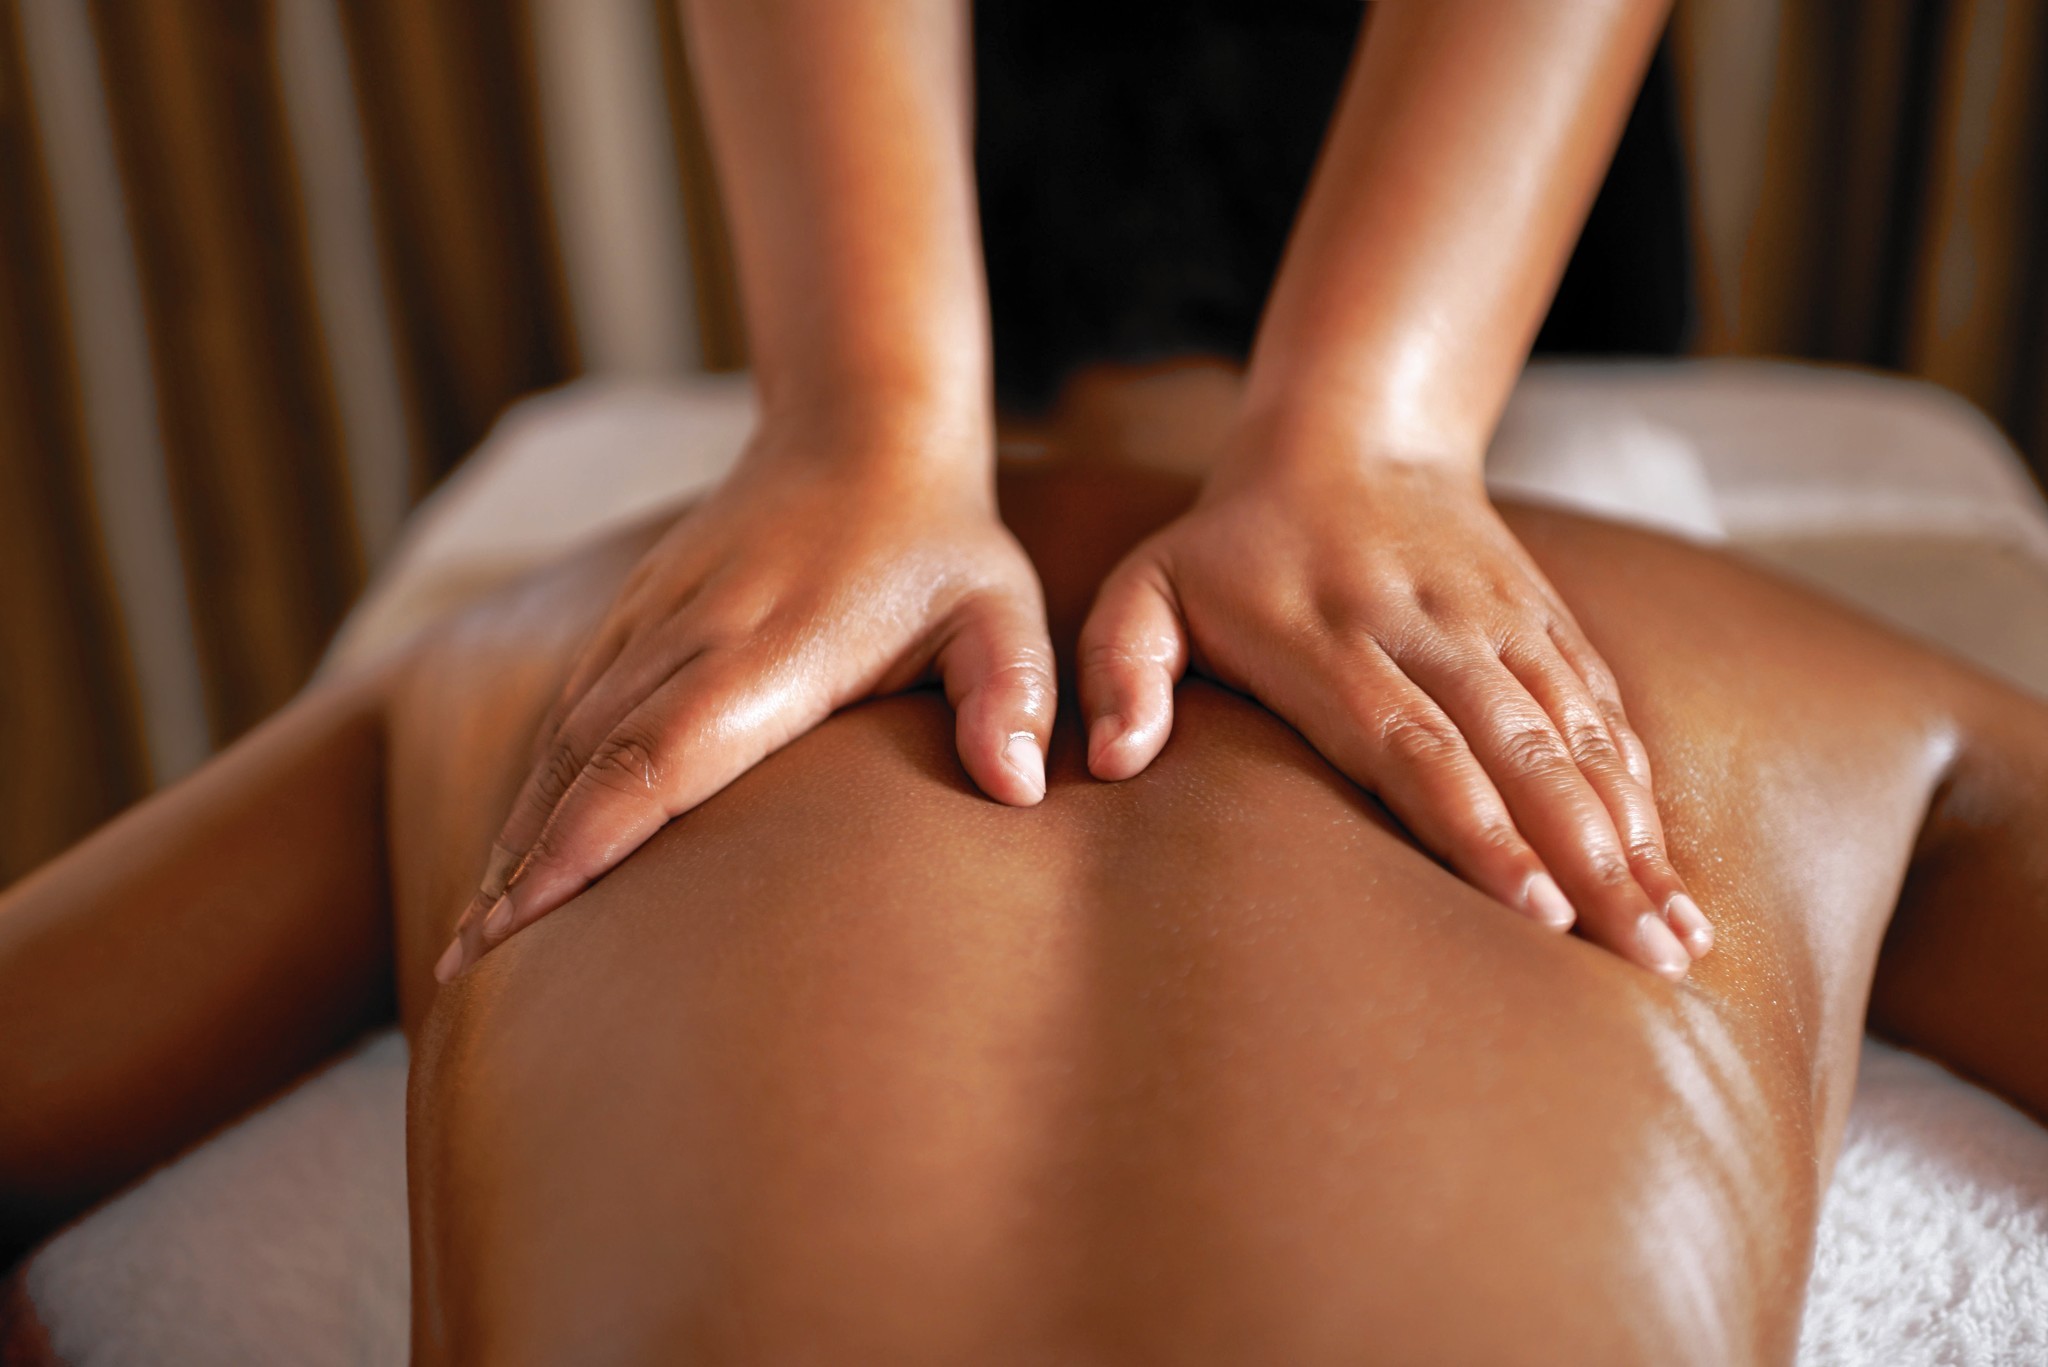 What Are The Roles of Masseur And Massage Oils in an Effective Ayurvedic Massage?